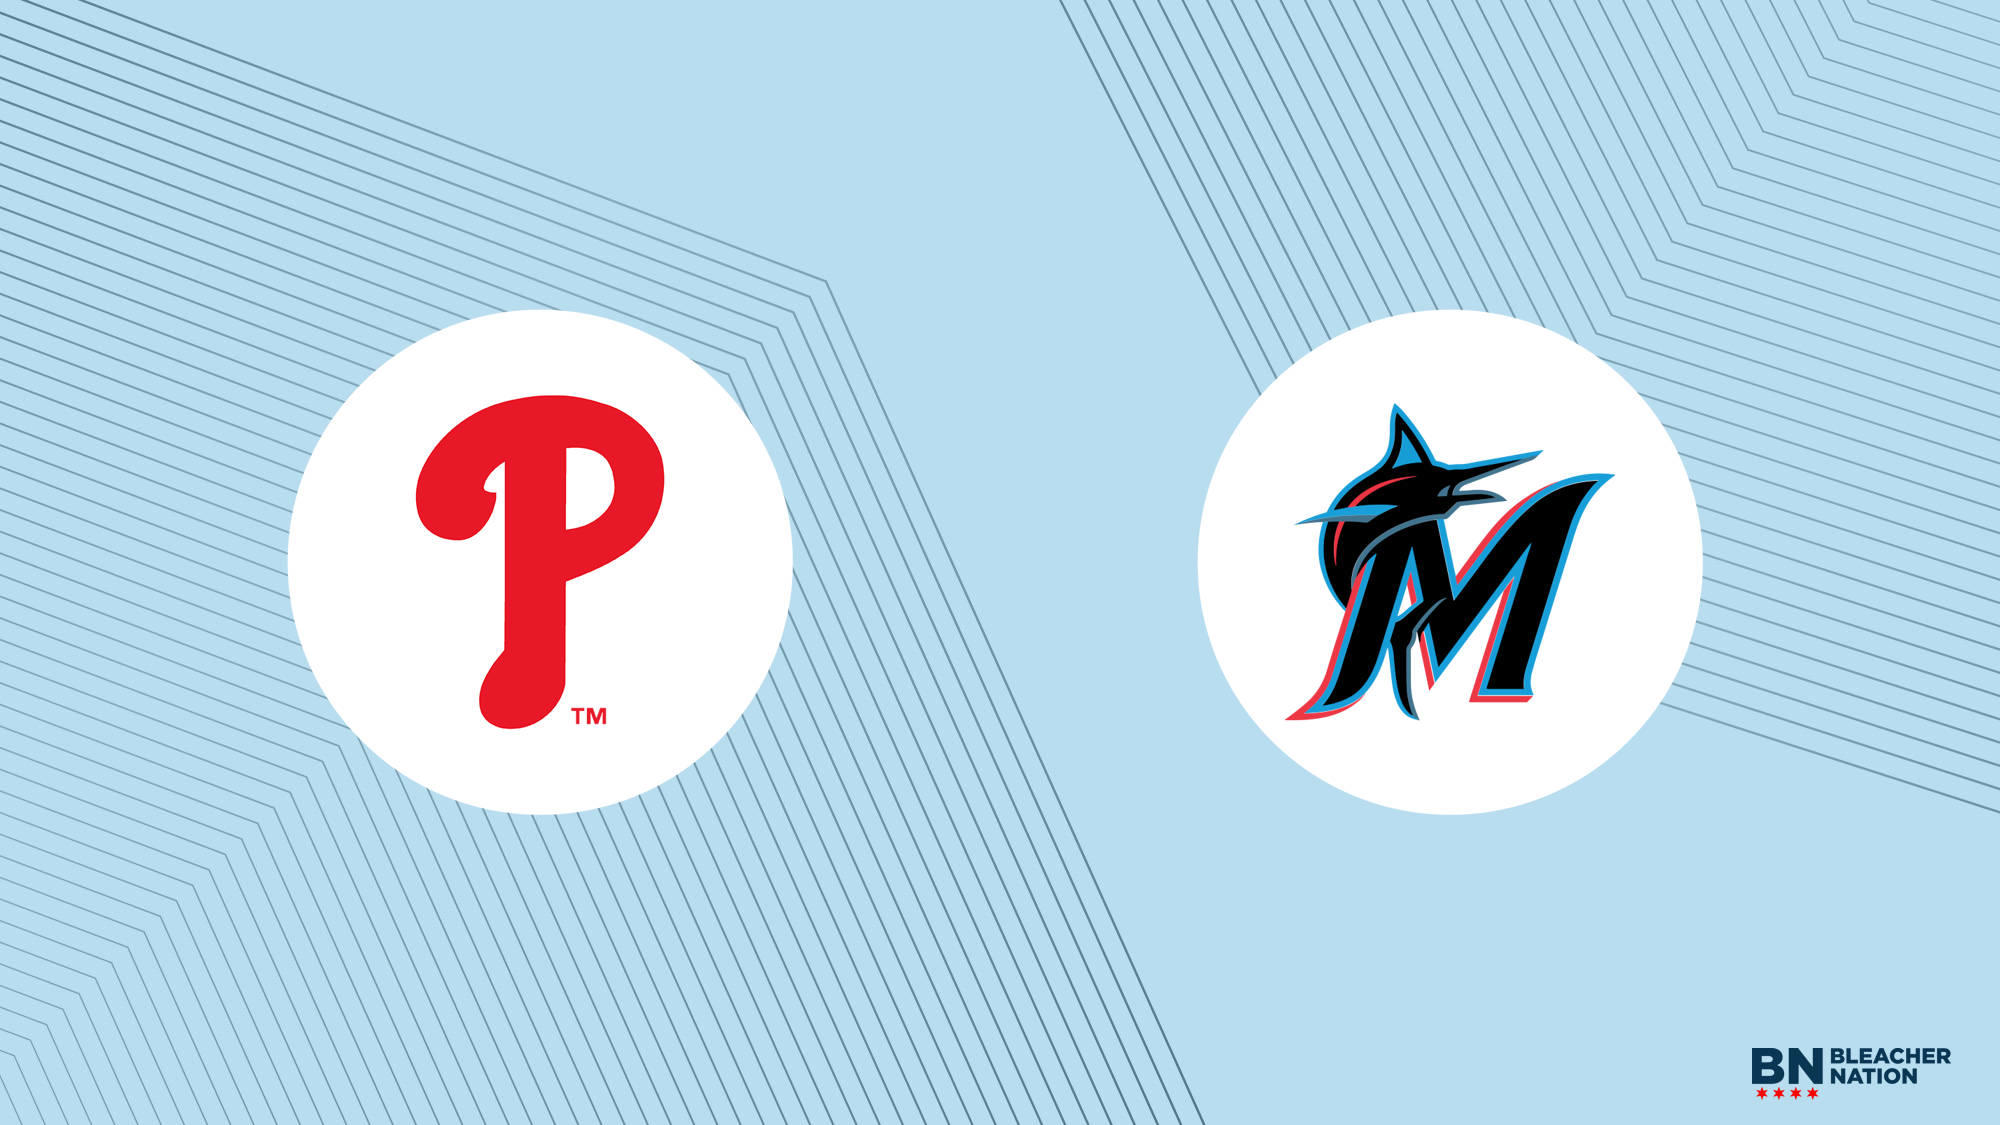 Marlins vs. Phillies prediction, betting odds for MLB on Tuesday 